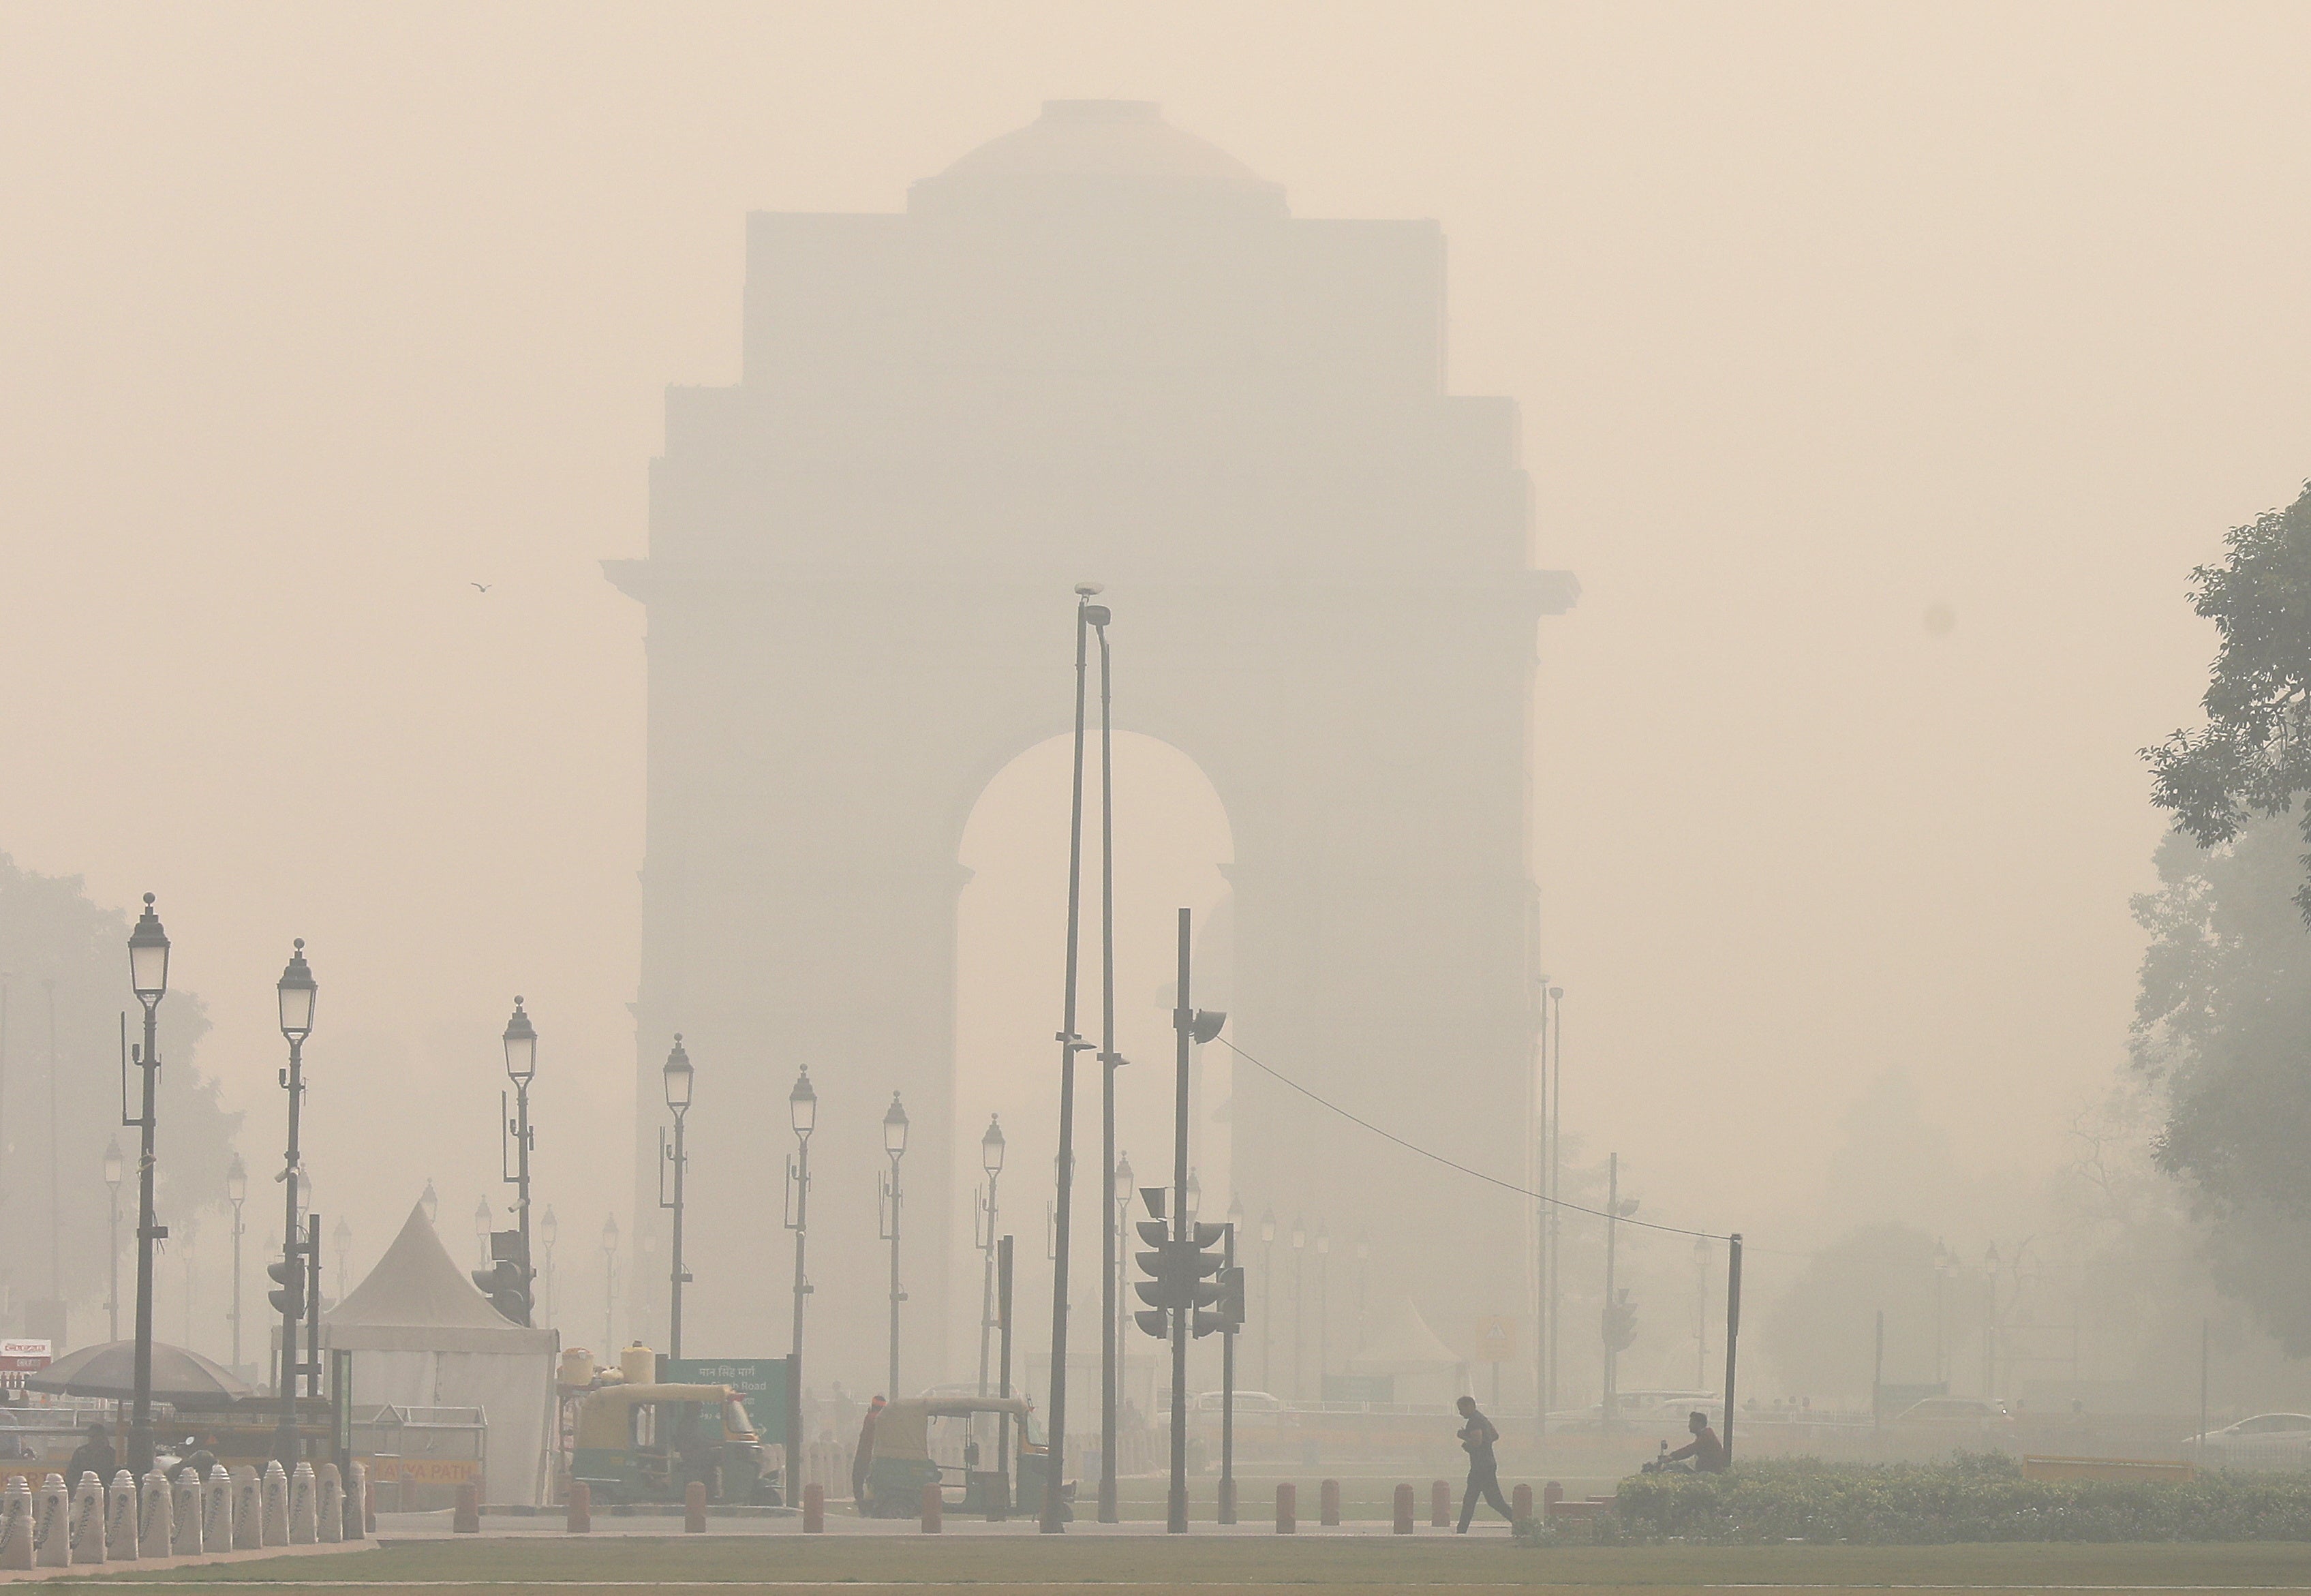 Pedestrians cross a street as the city is engulfed in heavy smog at Rajpath, in New Delhi